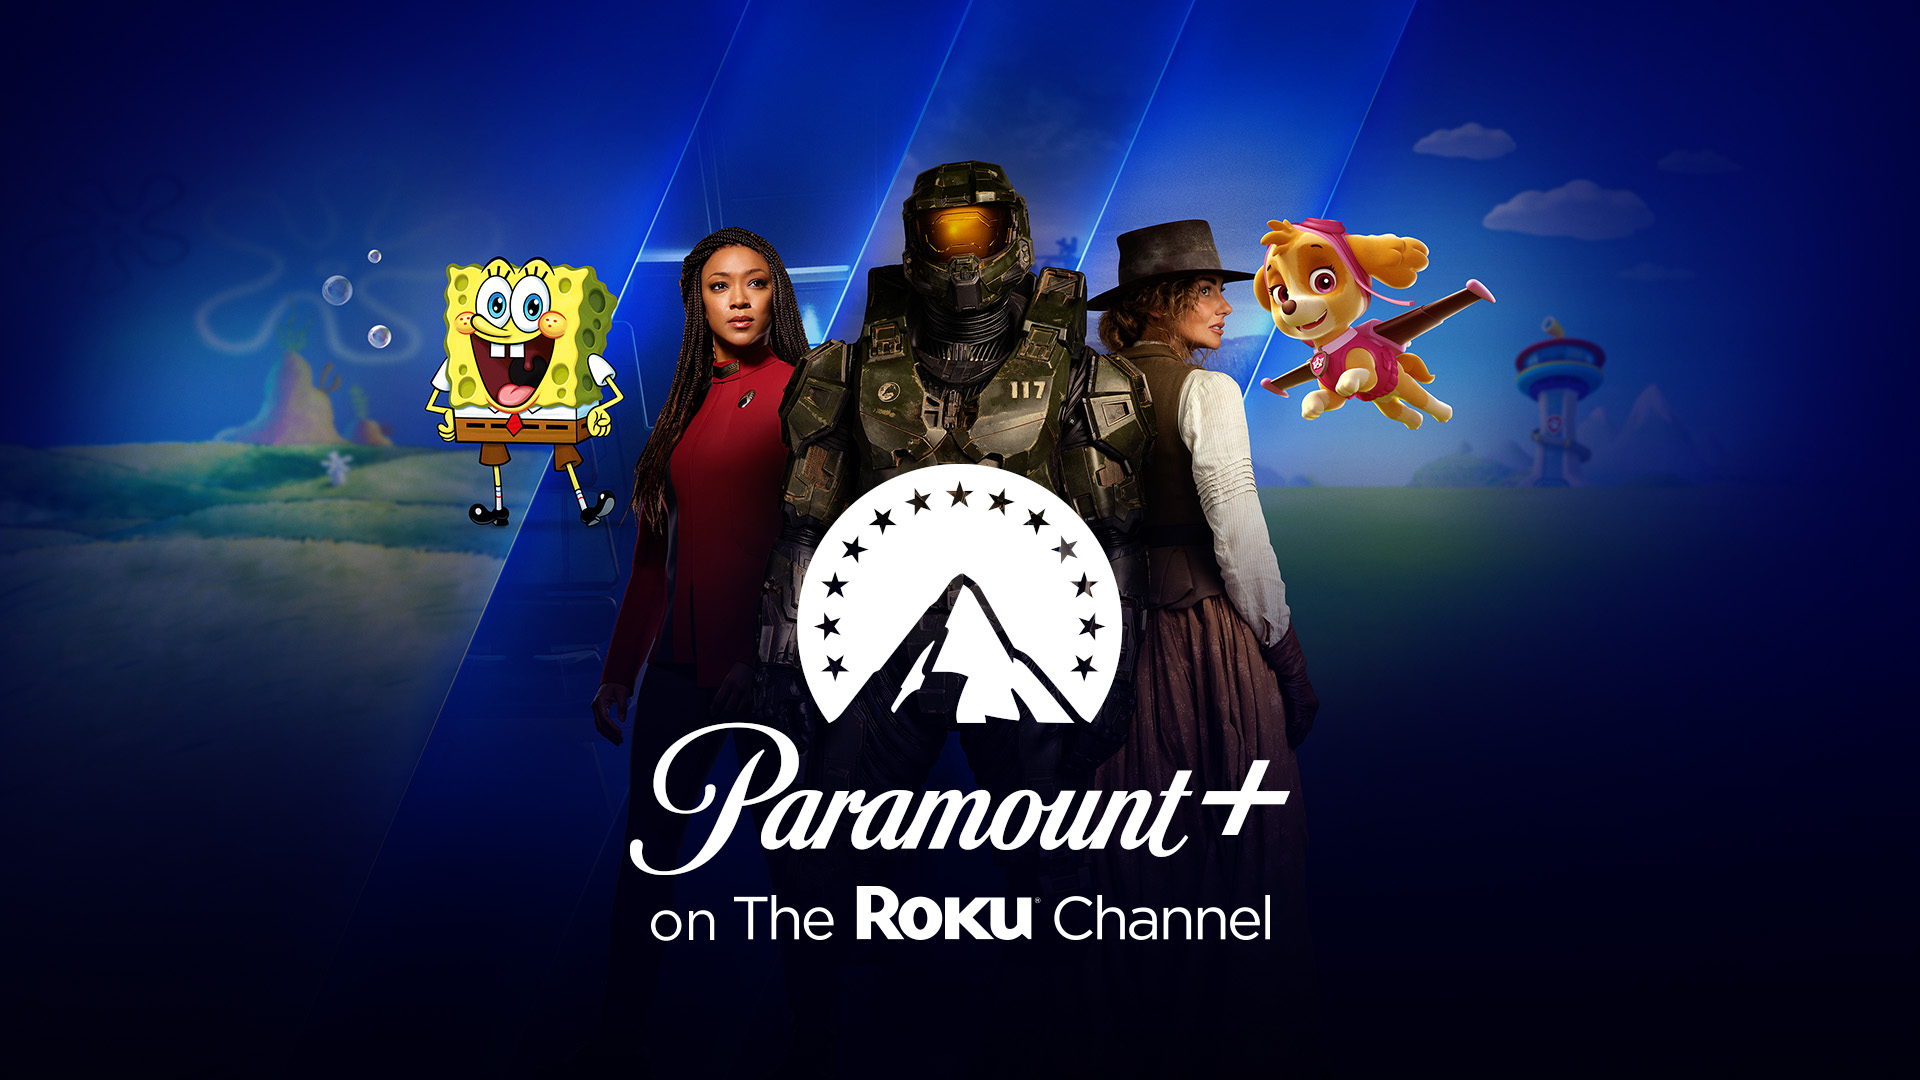 Paramount+ now available on The Roku Channel